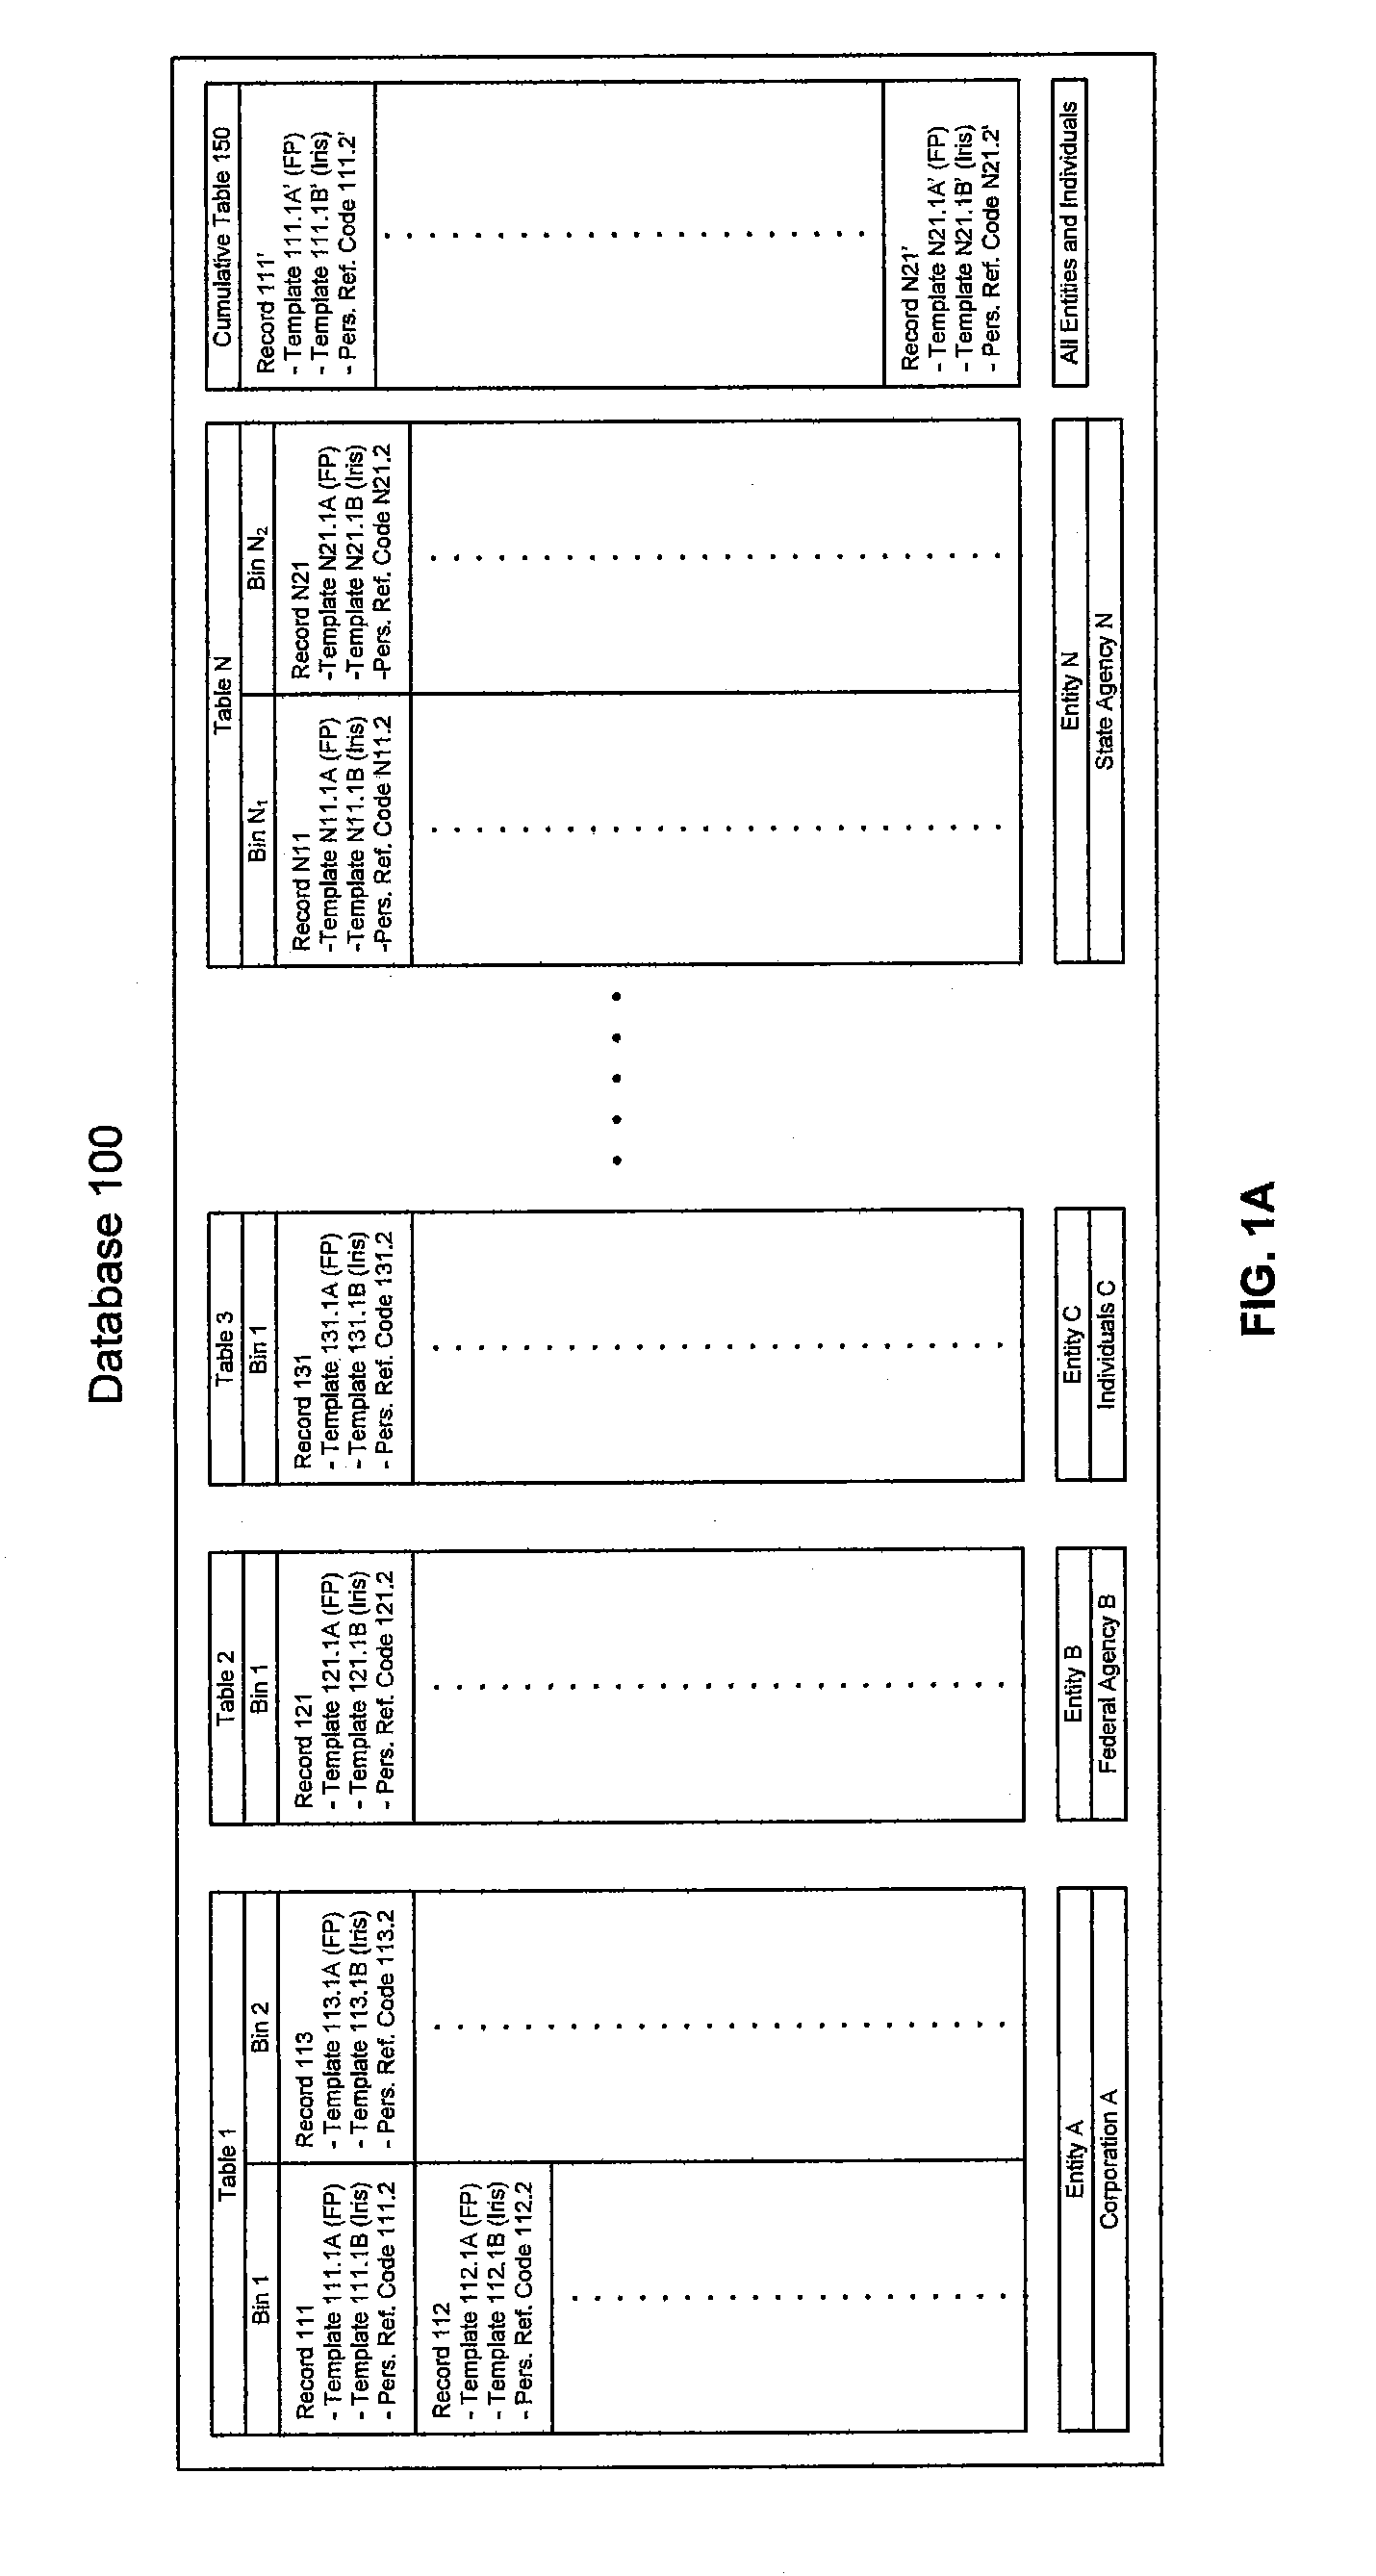 Method and system for authenticating and validating identities based on multi-modal biometric templates and special codes in a substantially anonymous process